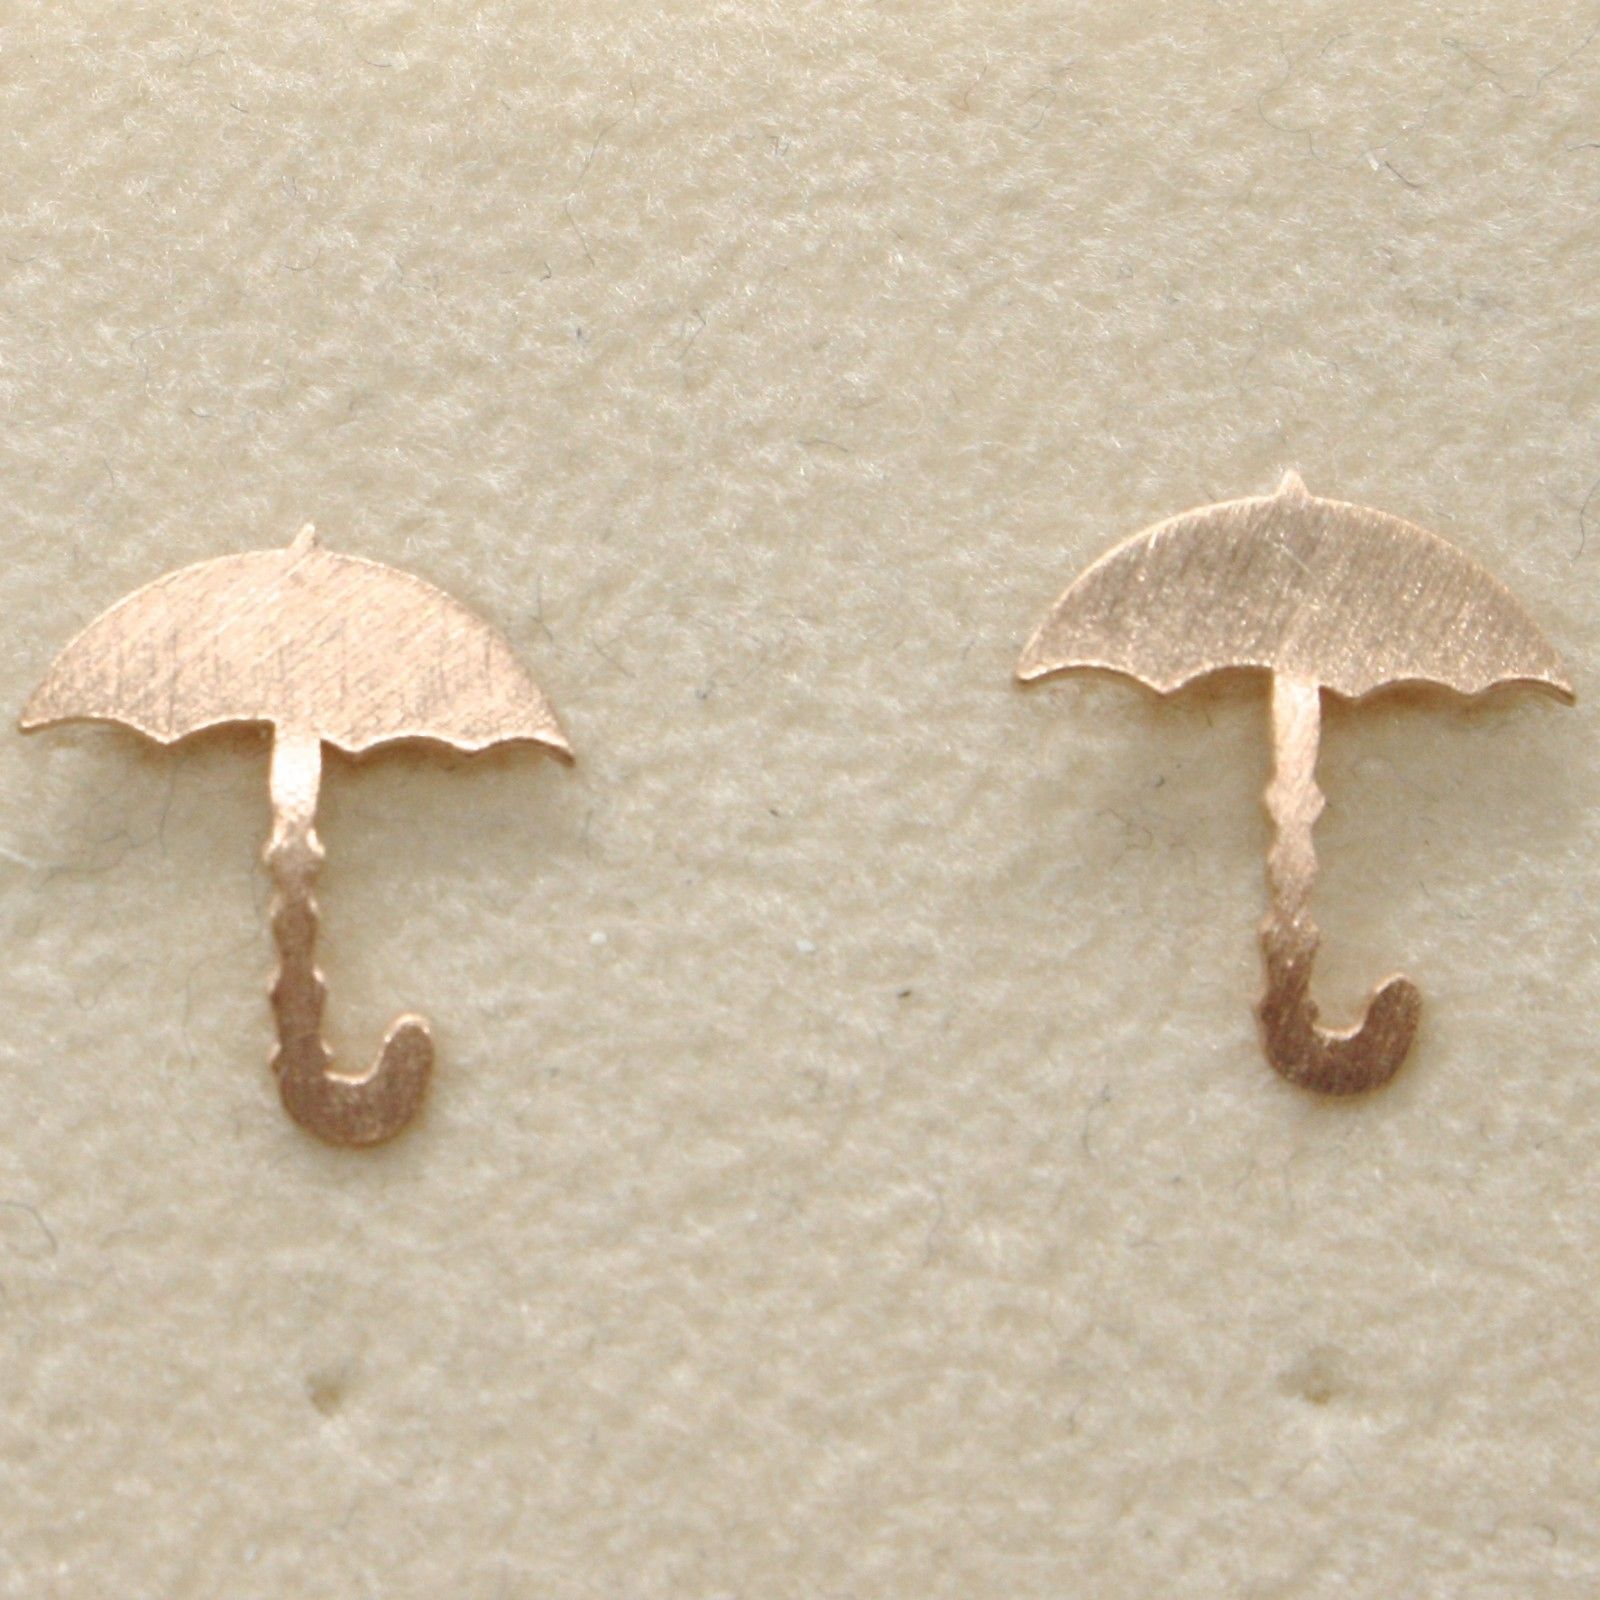 925 STERLING ROSE SILVER "LE FAVOLE" UMBRELLA EARRINGS TALE SATIN MADE IN ITALY - $29.00